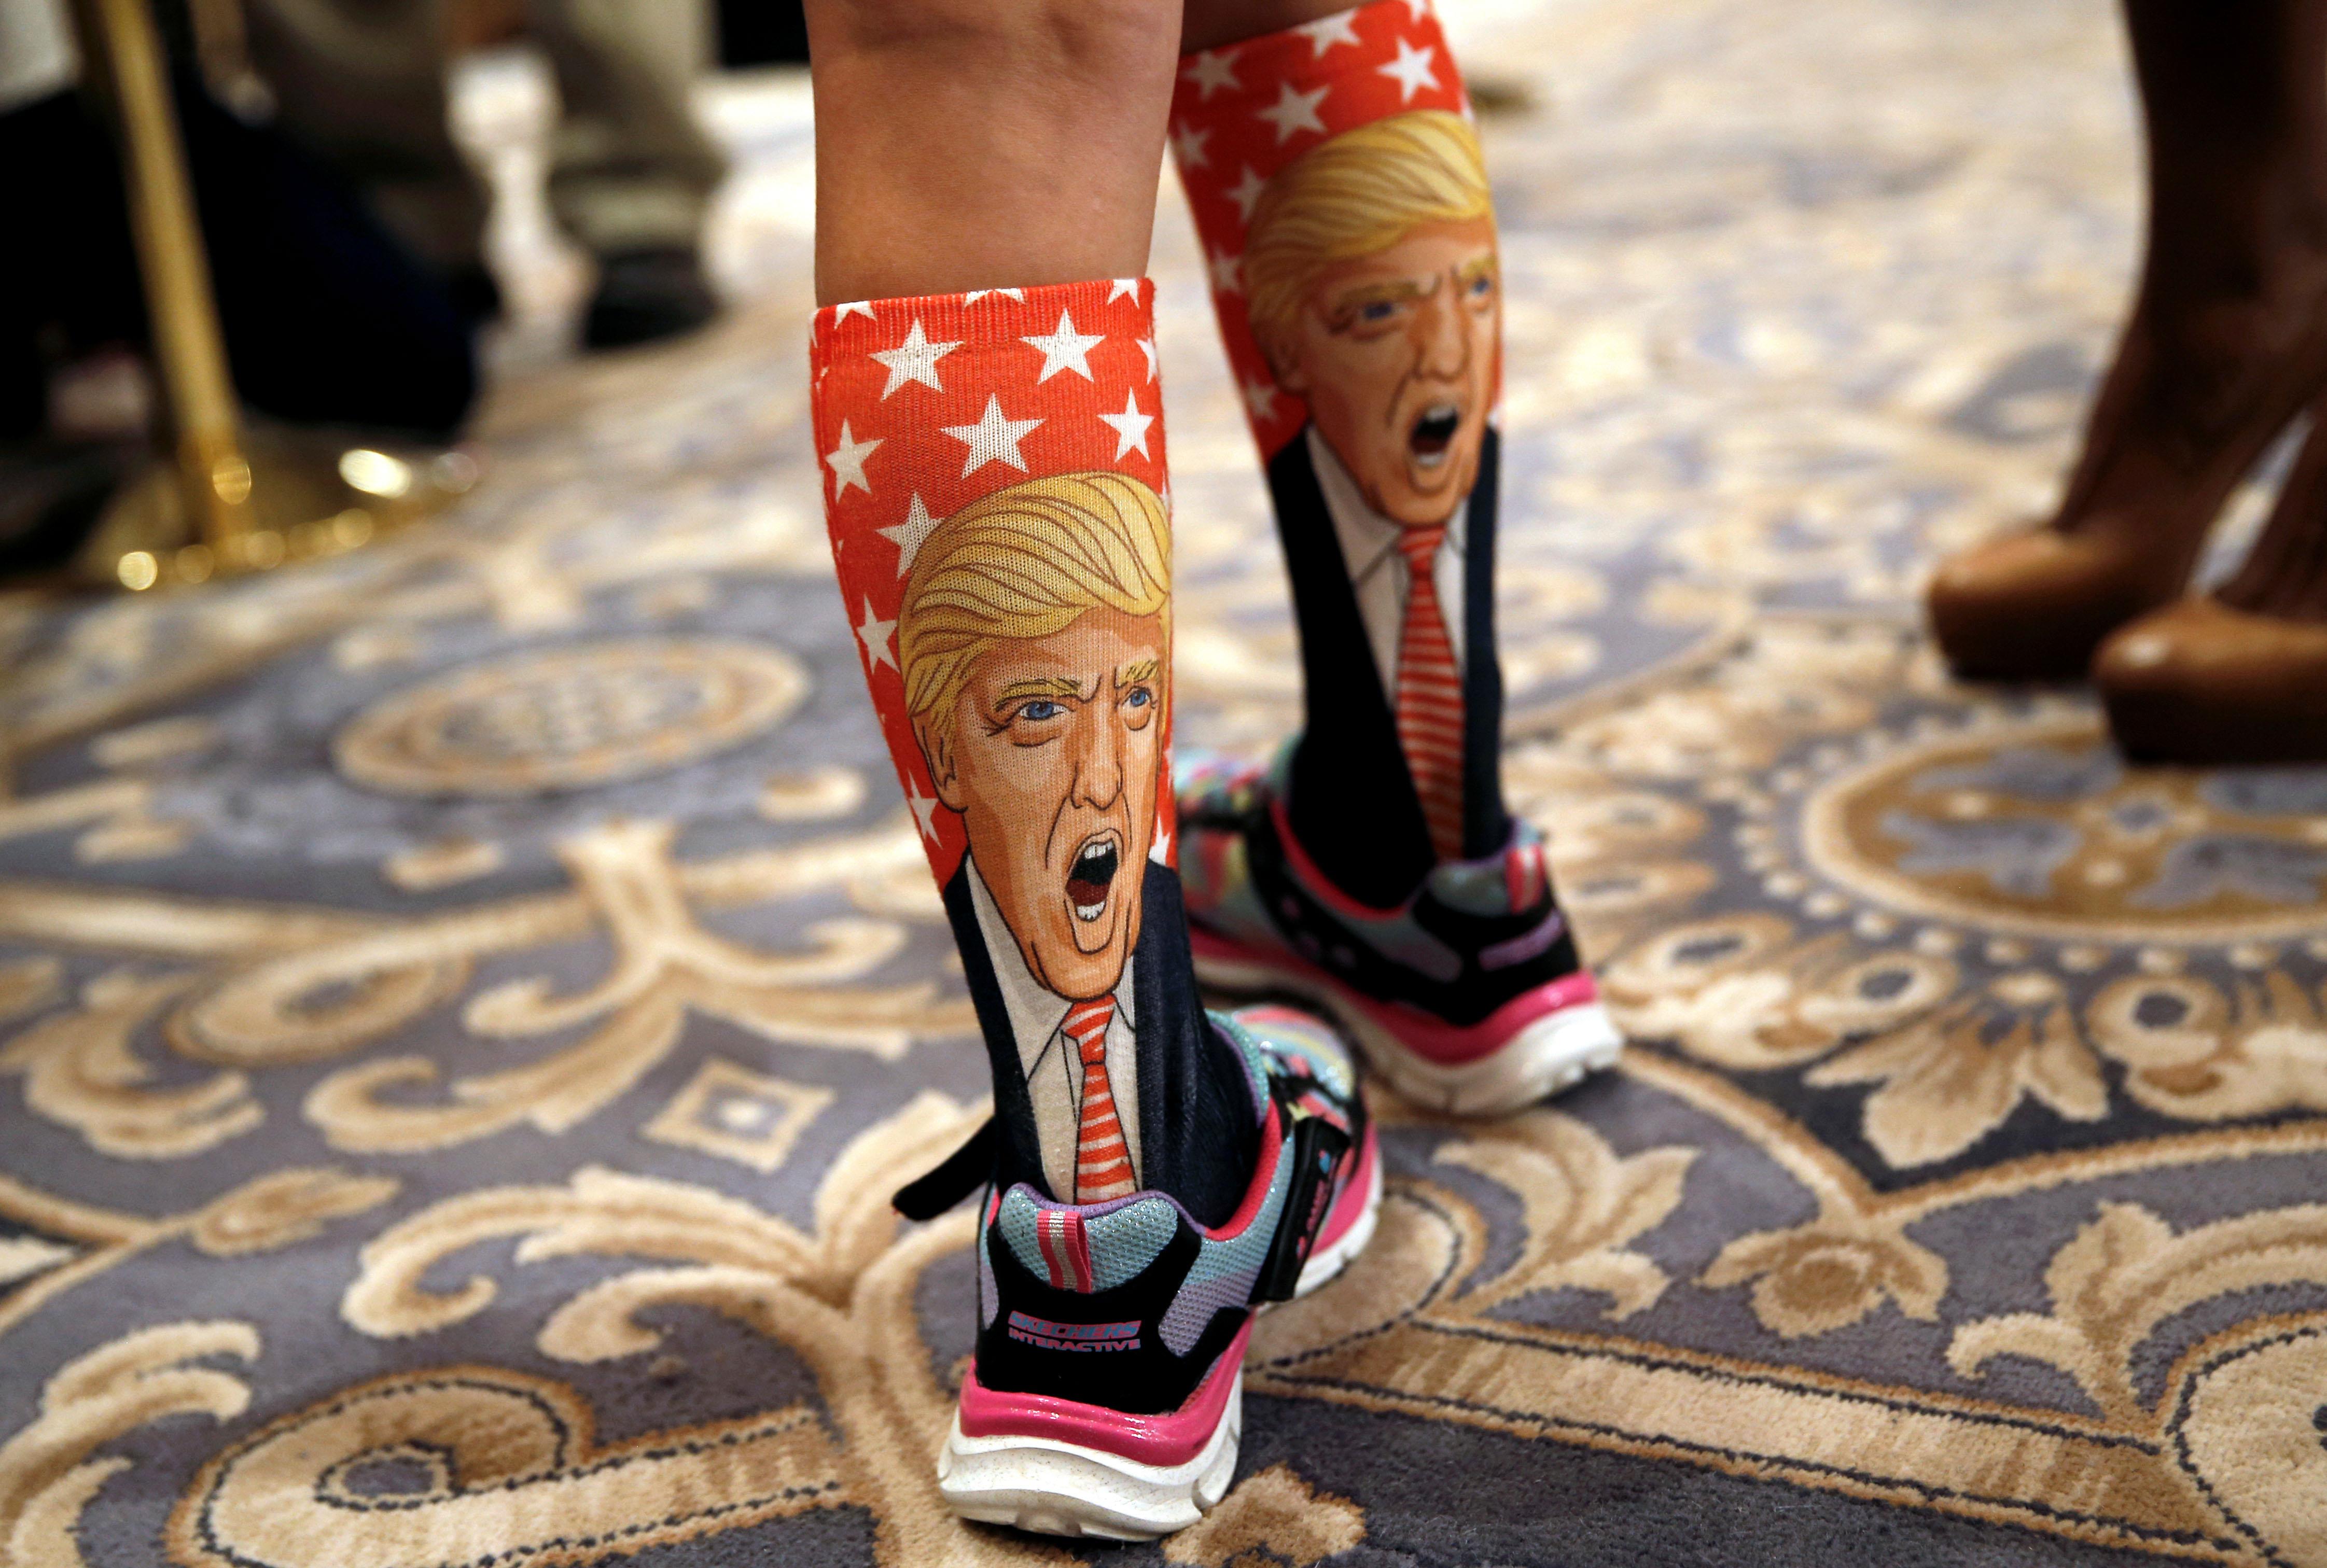 11-Year-old Millie March wears socks with the image of Republican presidential nominee Donald Trump 